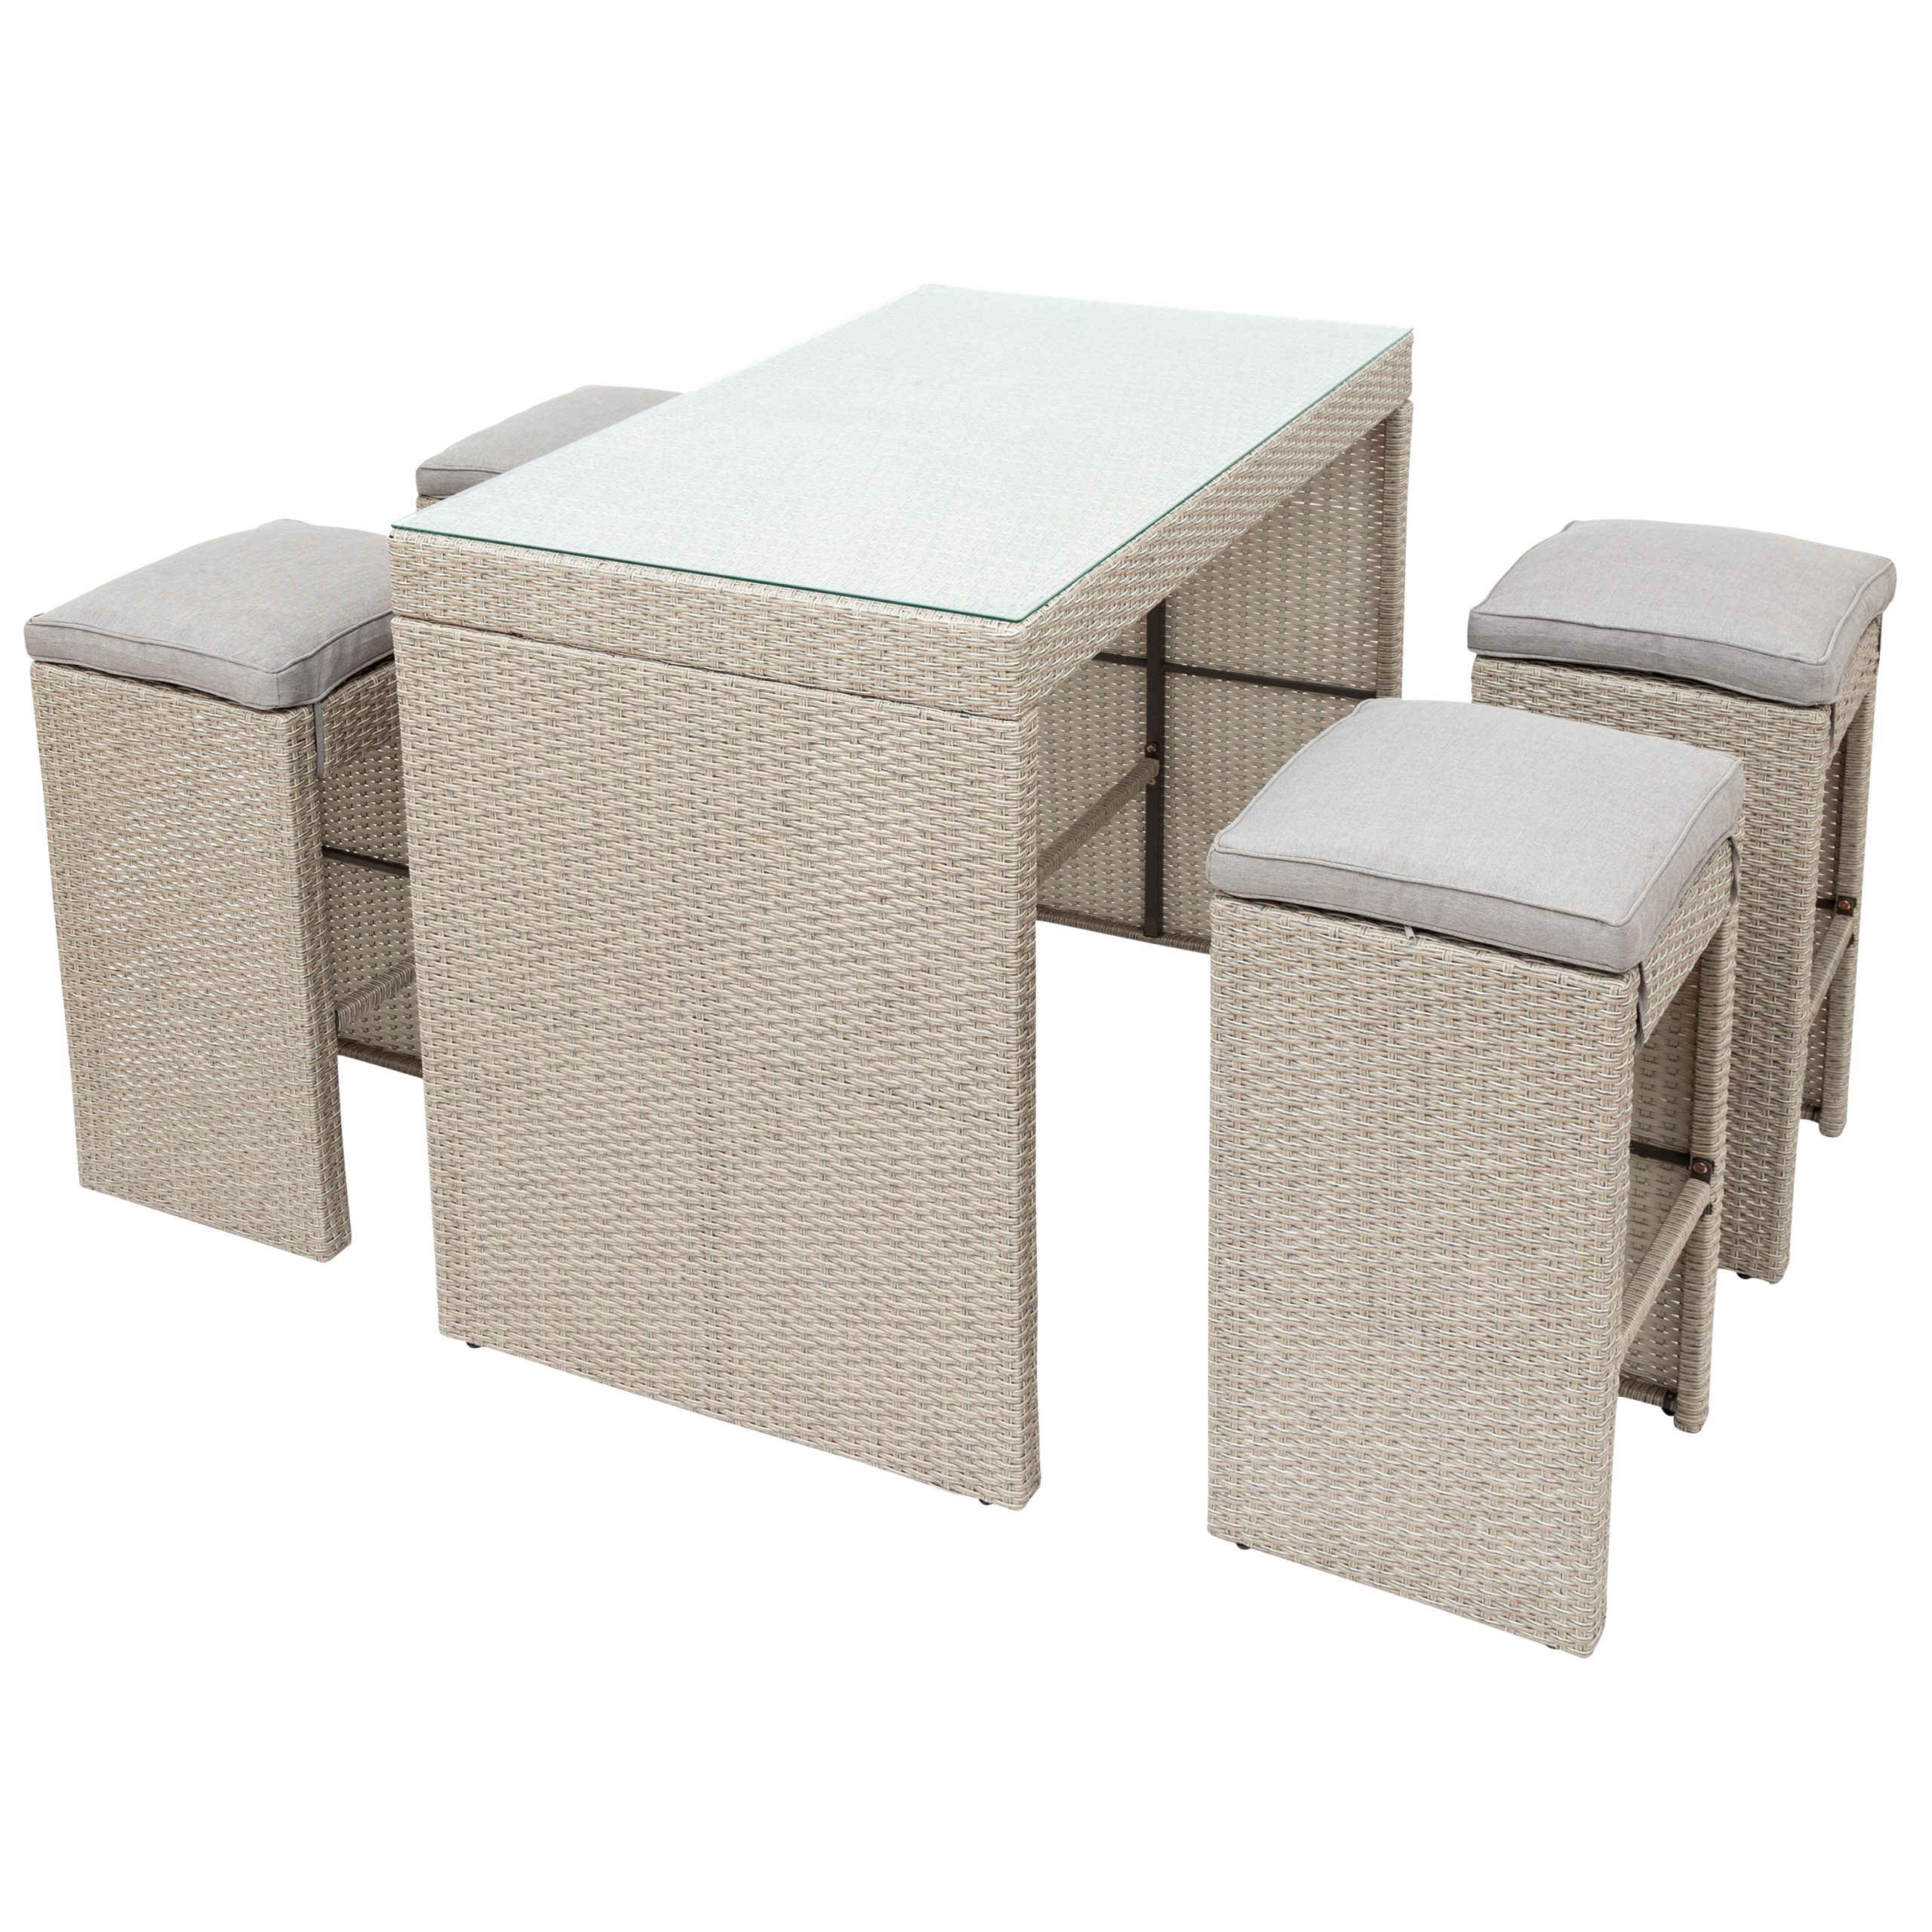 5-Piece Rattan Outdoor Patio Furniture Set with 4 Stools - SH000238AAD